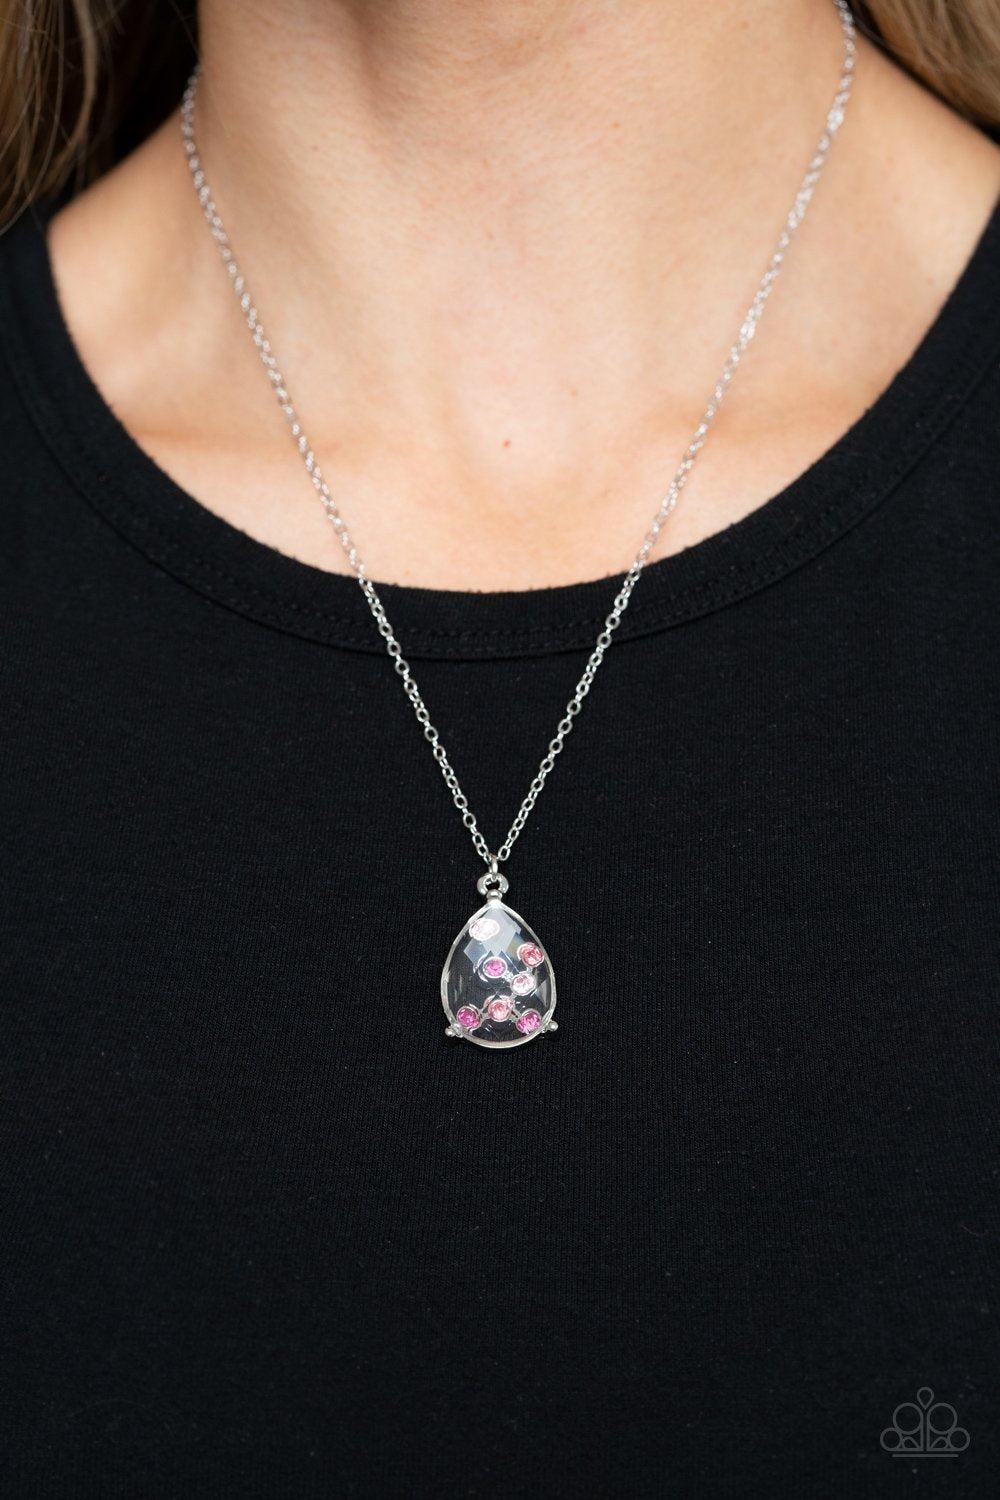 Stormy Shimmer Pink Rhinestone Teardrop Necklace - Paparazzi Accessories- lightbox - CarasShop.com - $5 Jewelry by Cara Jewels